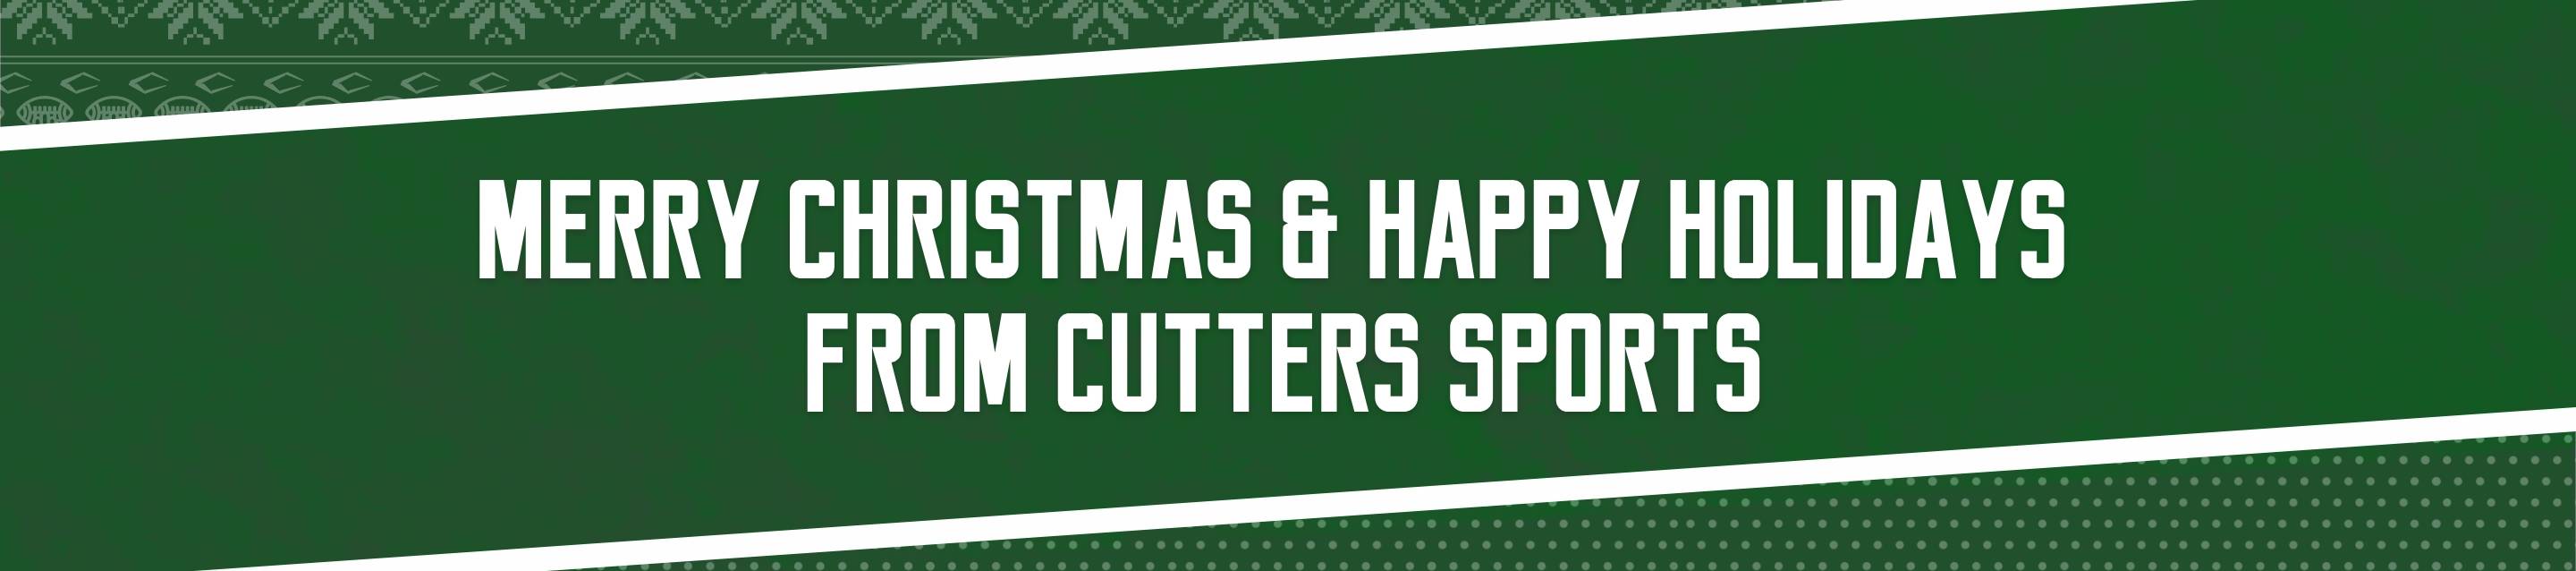 Merry Christmas & Happy Holidays from Cutters Sports